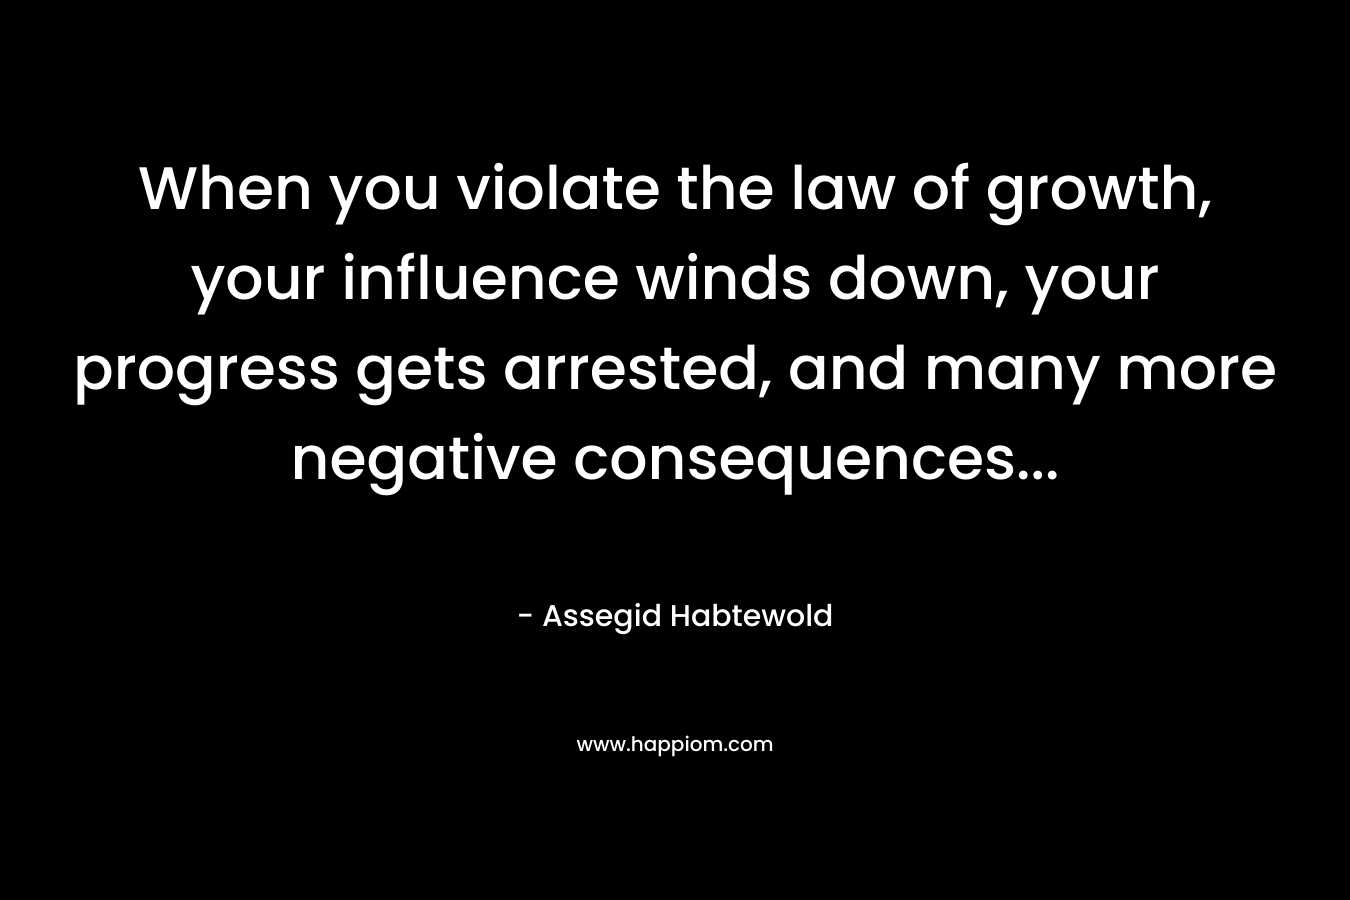 When you violate the law of growth, your influence winds down, your progress gets arrested, and many more negative consequences… – Assegid Habtewold